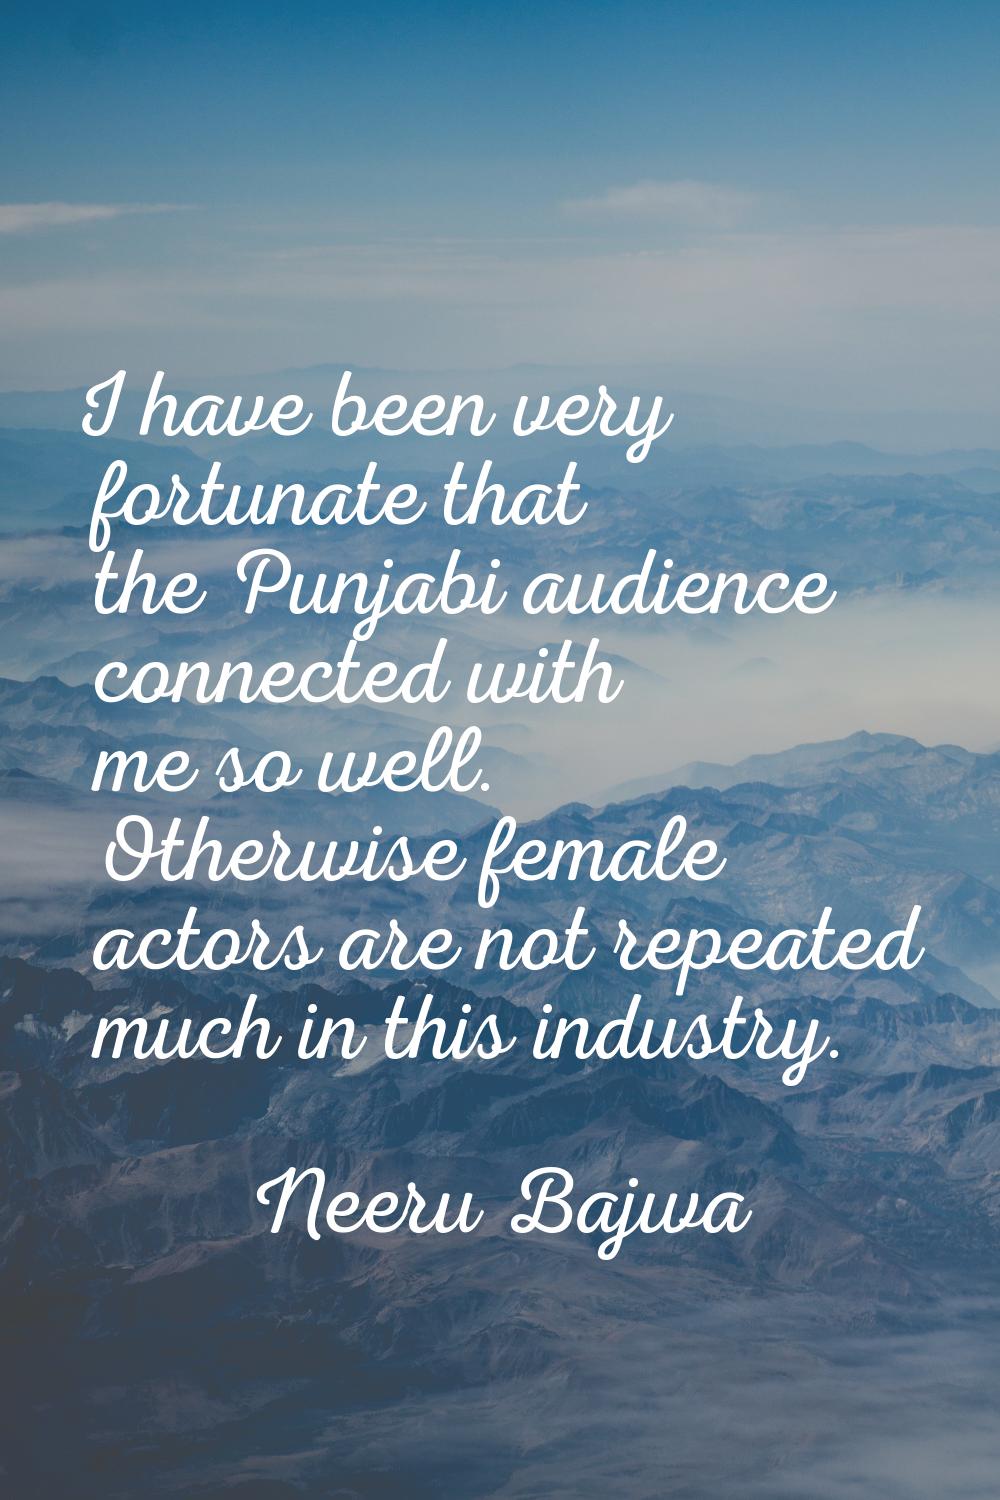 I have been very fortunate that the Punjabi audience connected with me so well. Otherwise female ac